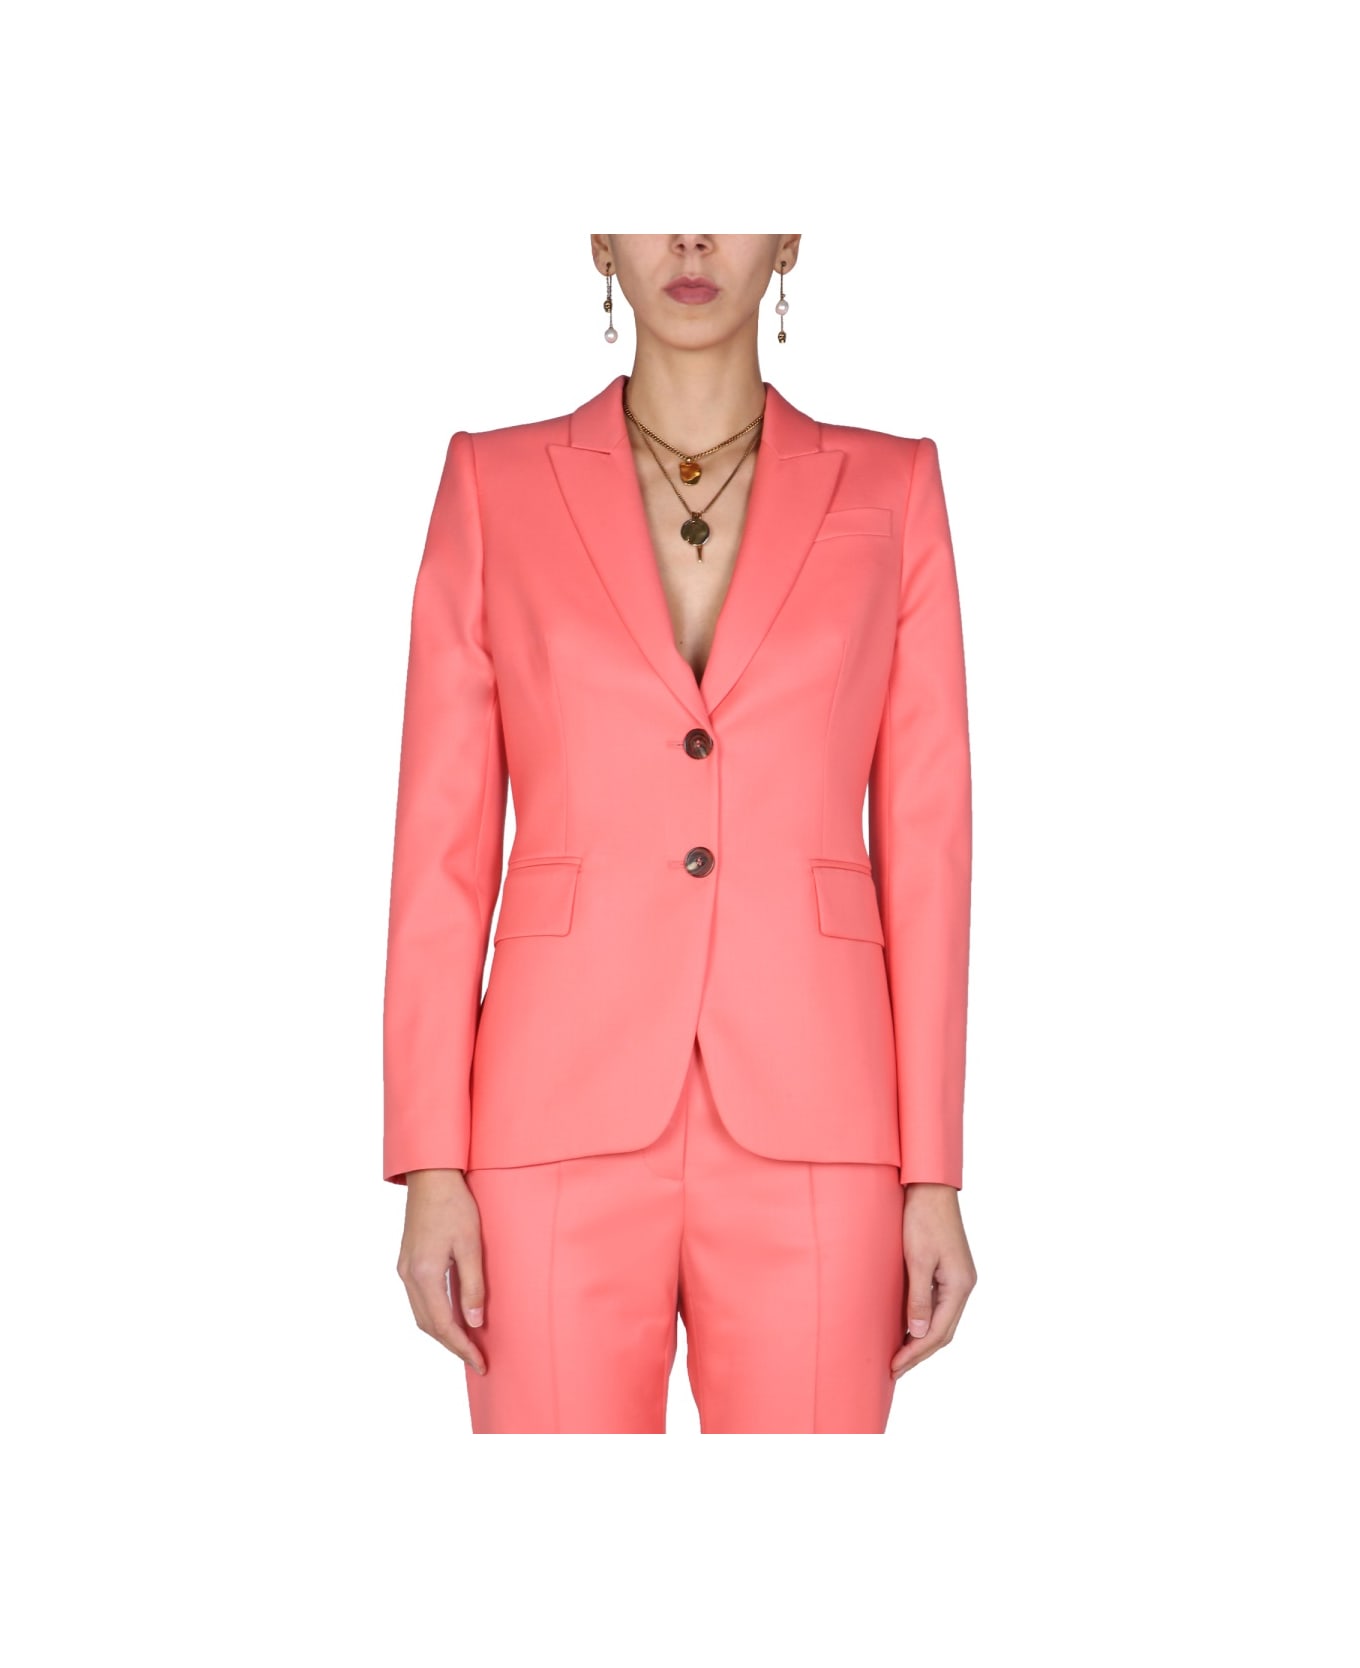 Alexander McQueen Jacket With Two Buttons - PINK